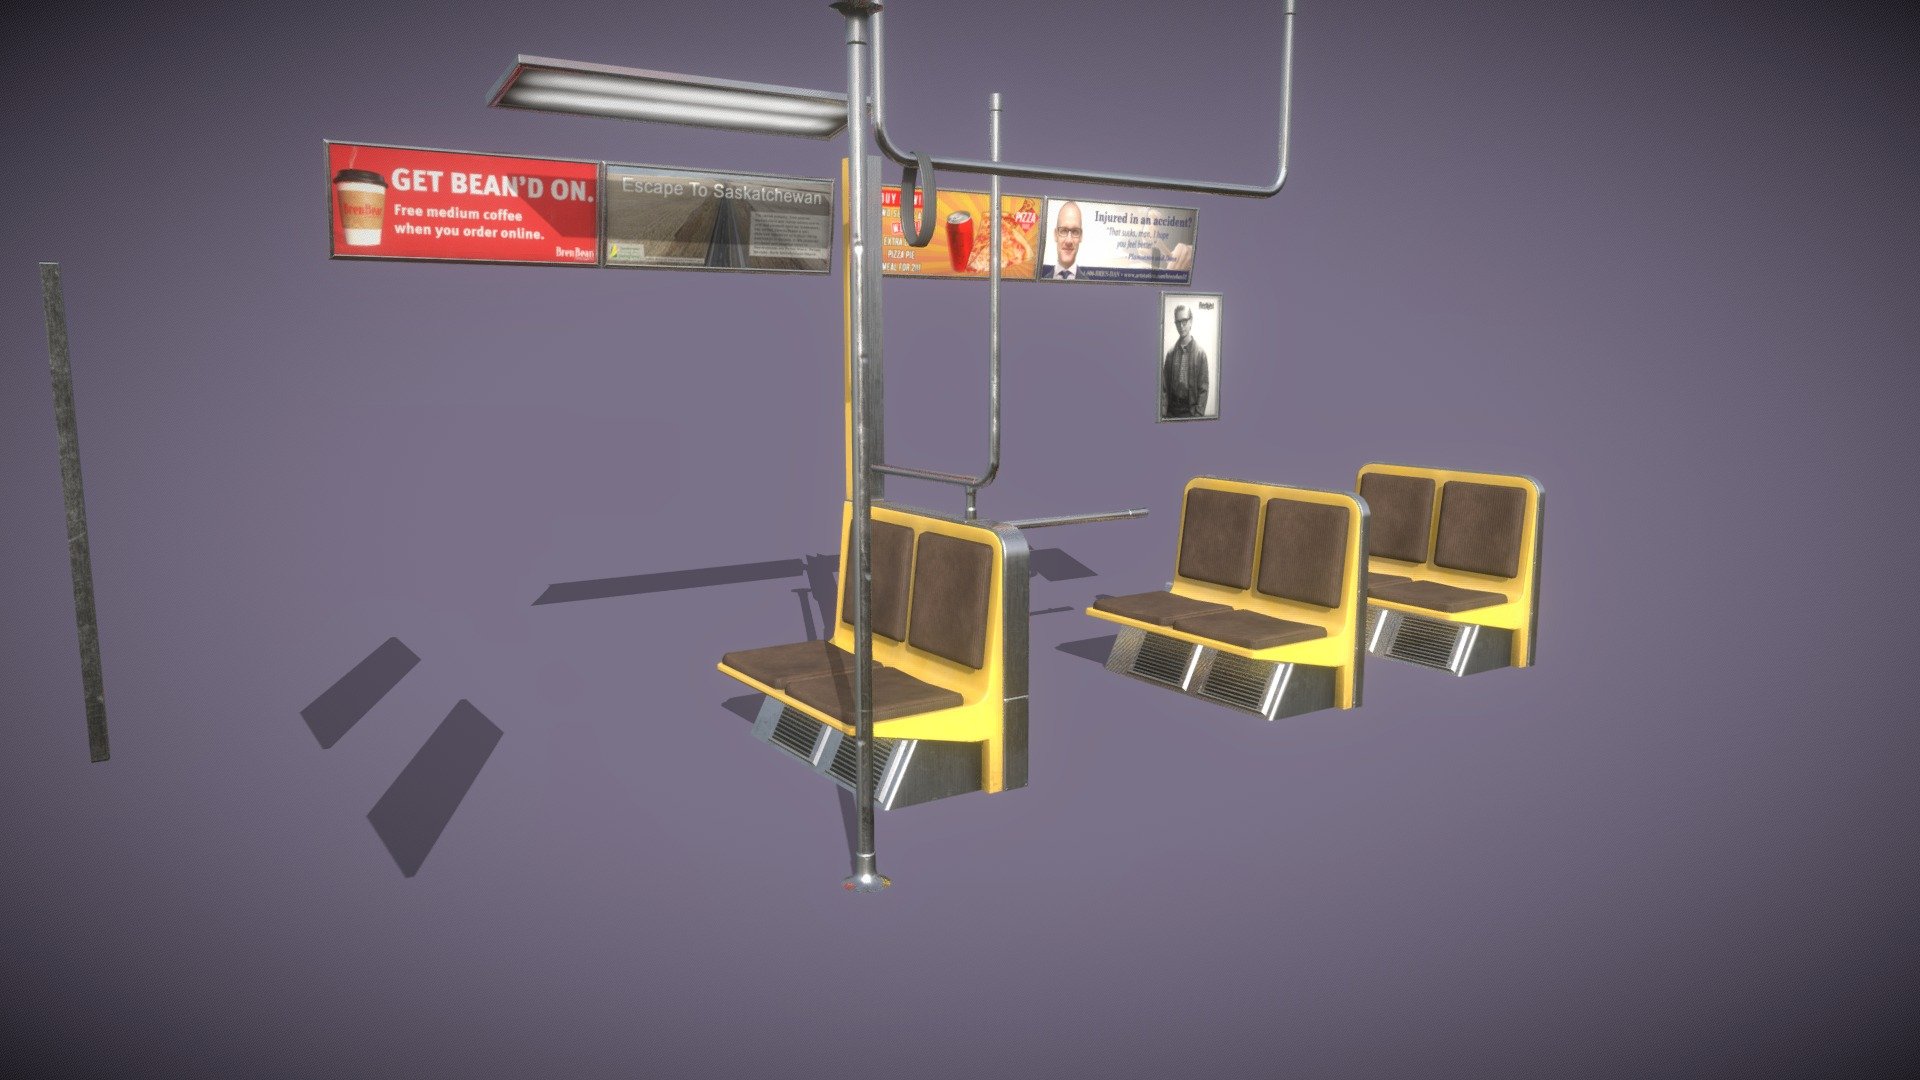 The props I worked on for my Subway scene on artstation. This was a great learning experience for learning the environment art pipeline 3d model